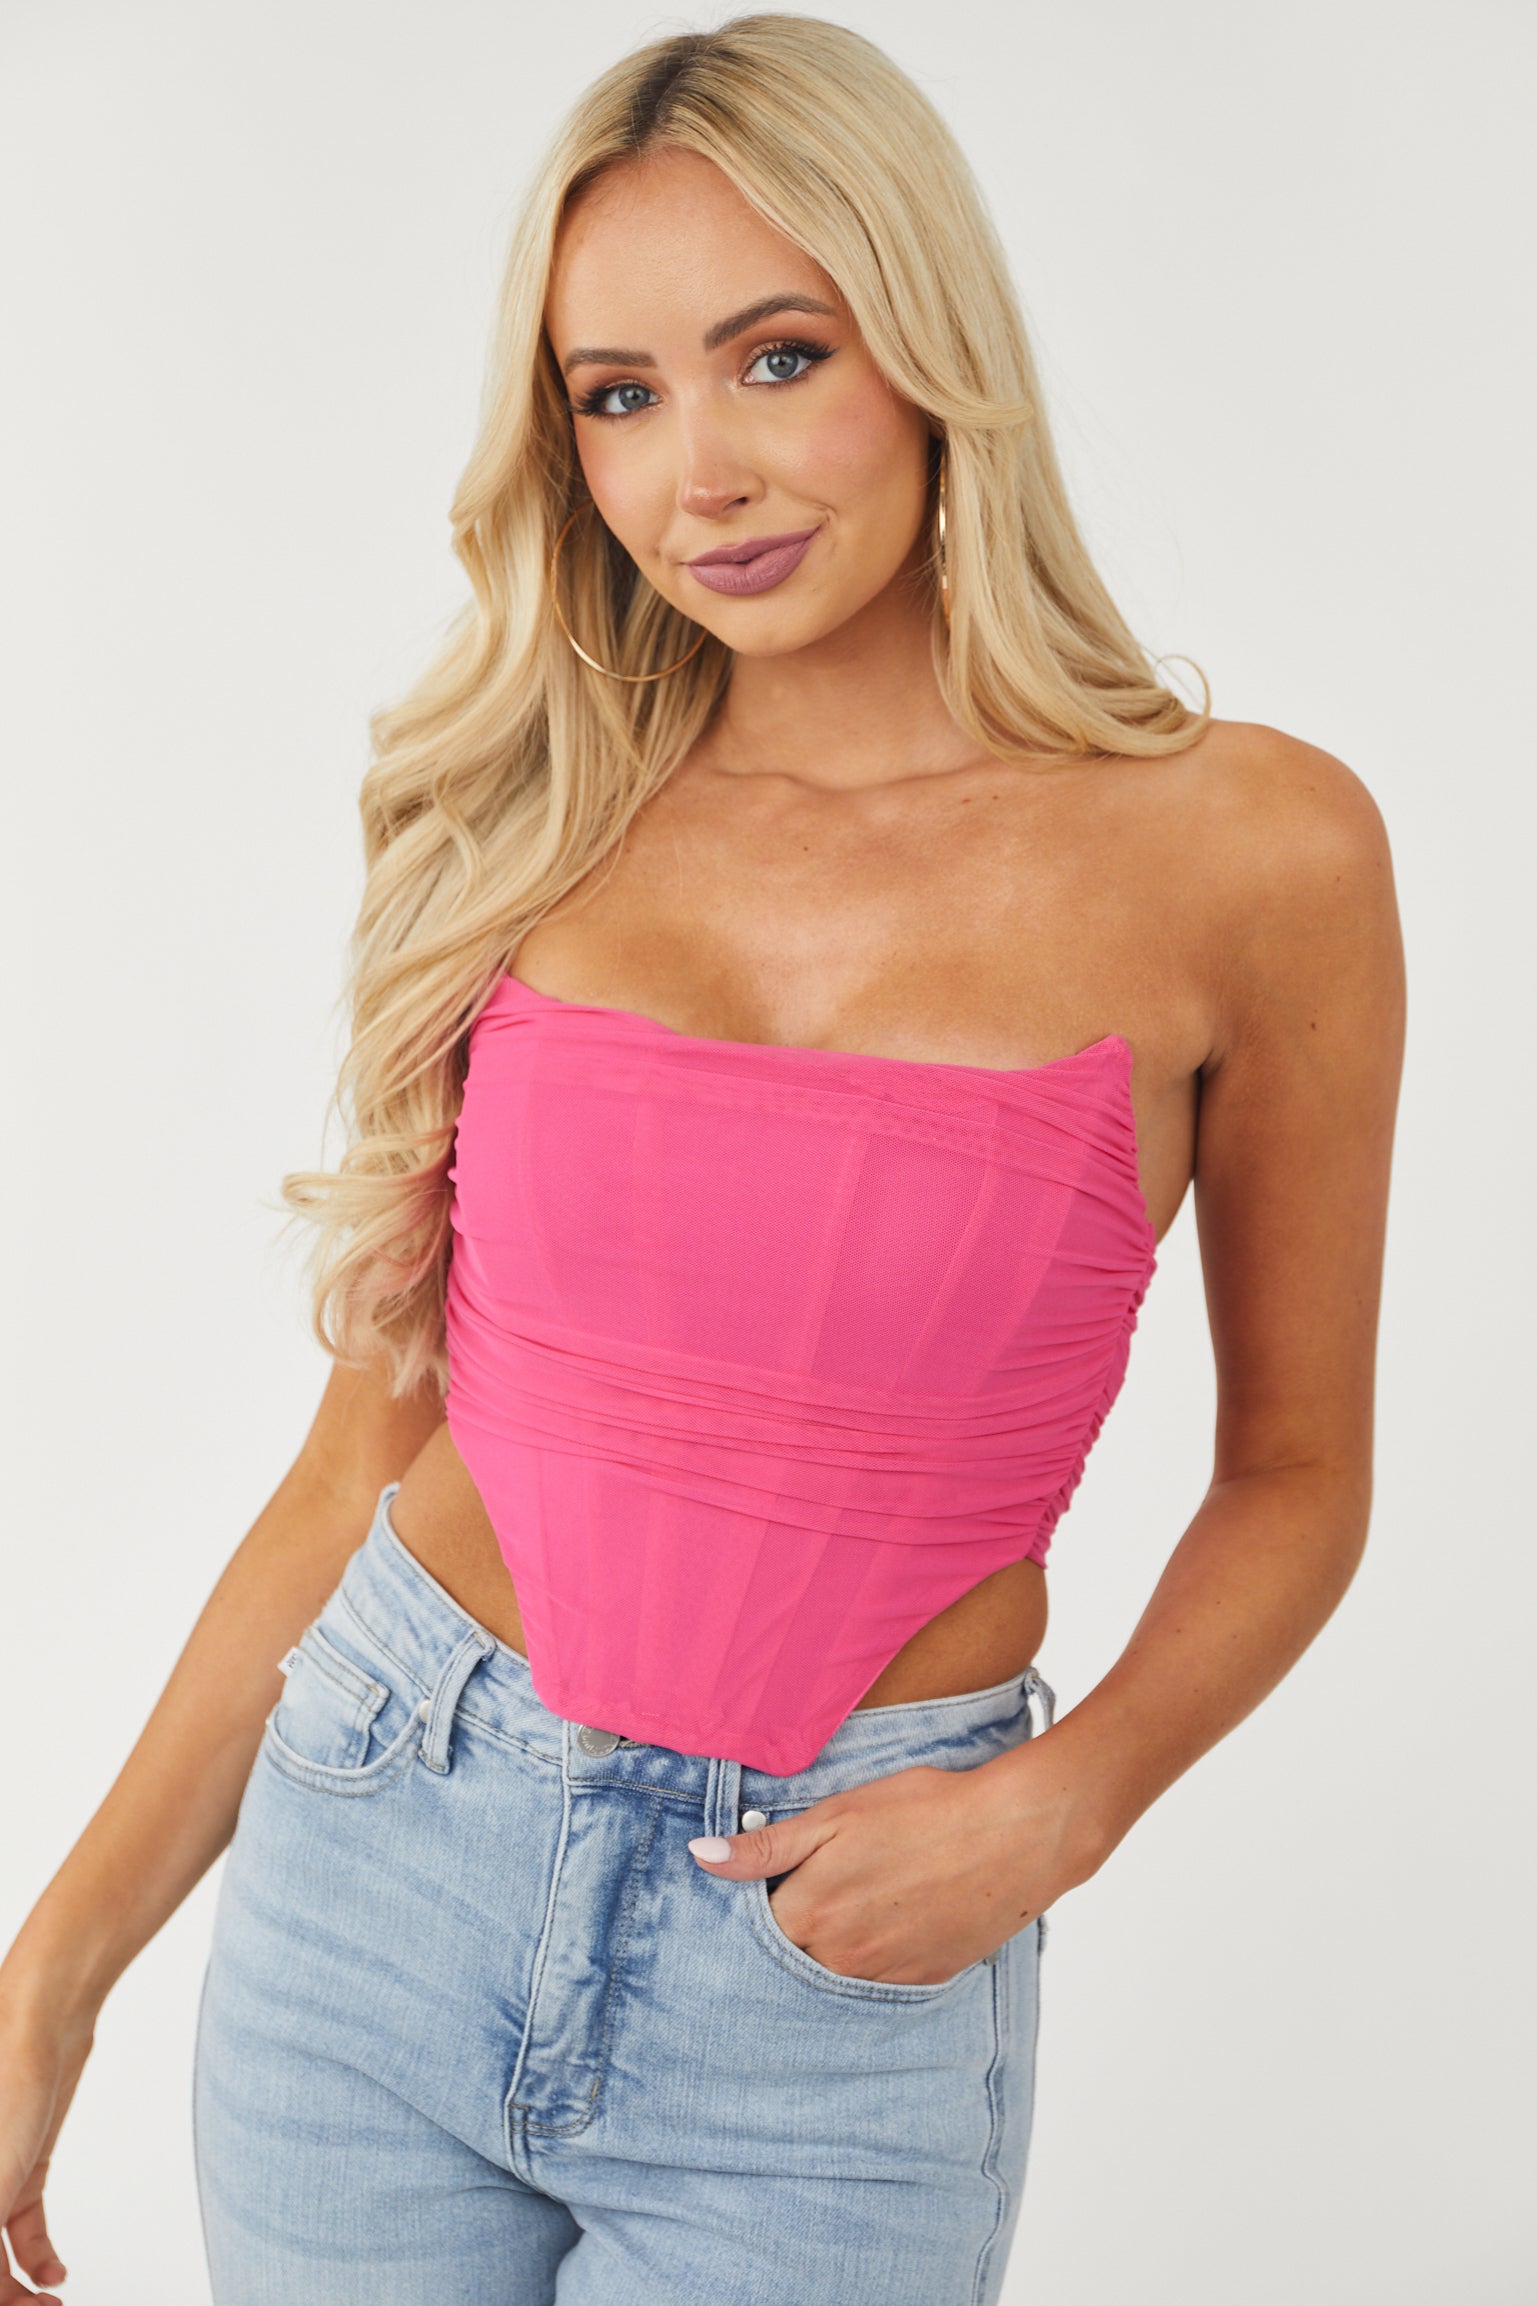 Neon Pink Lace Bustier Tube Top